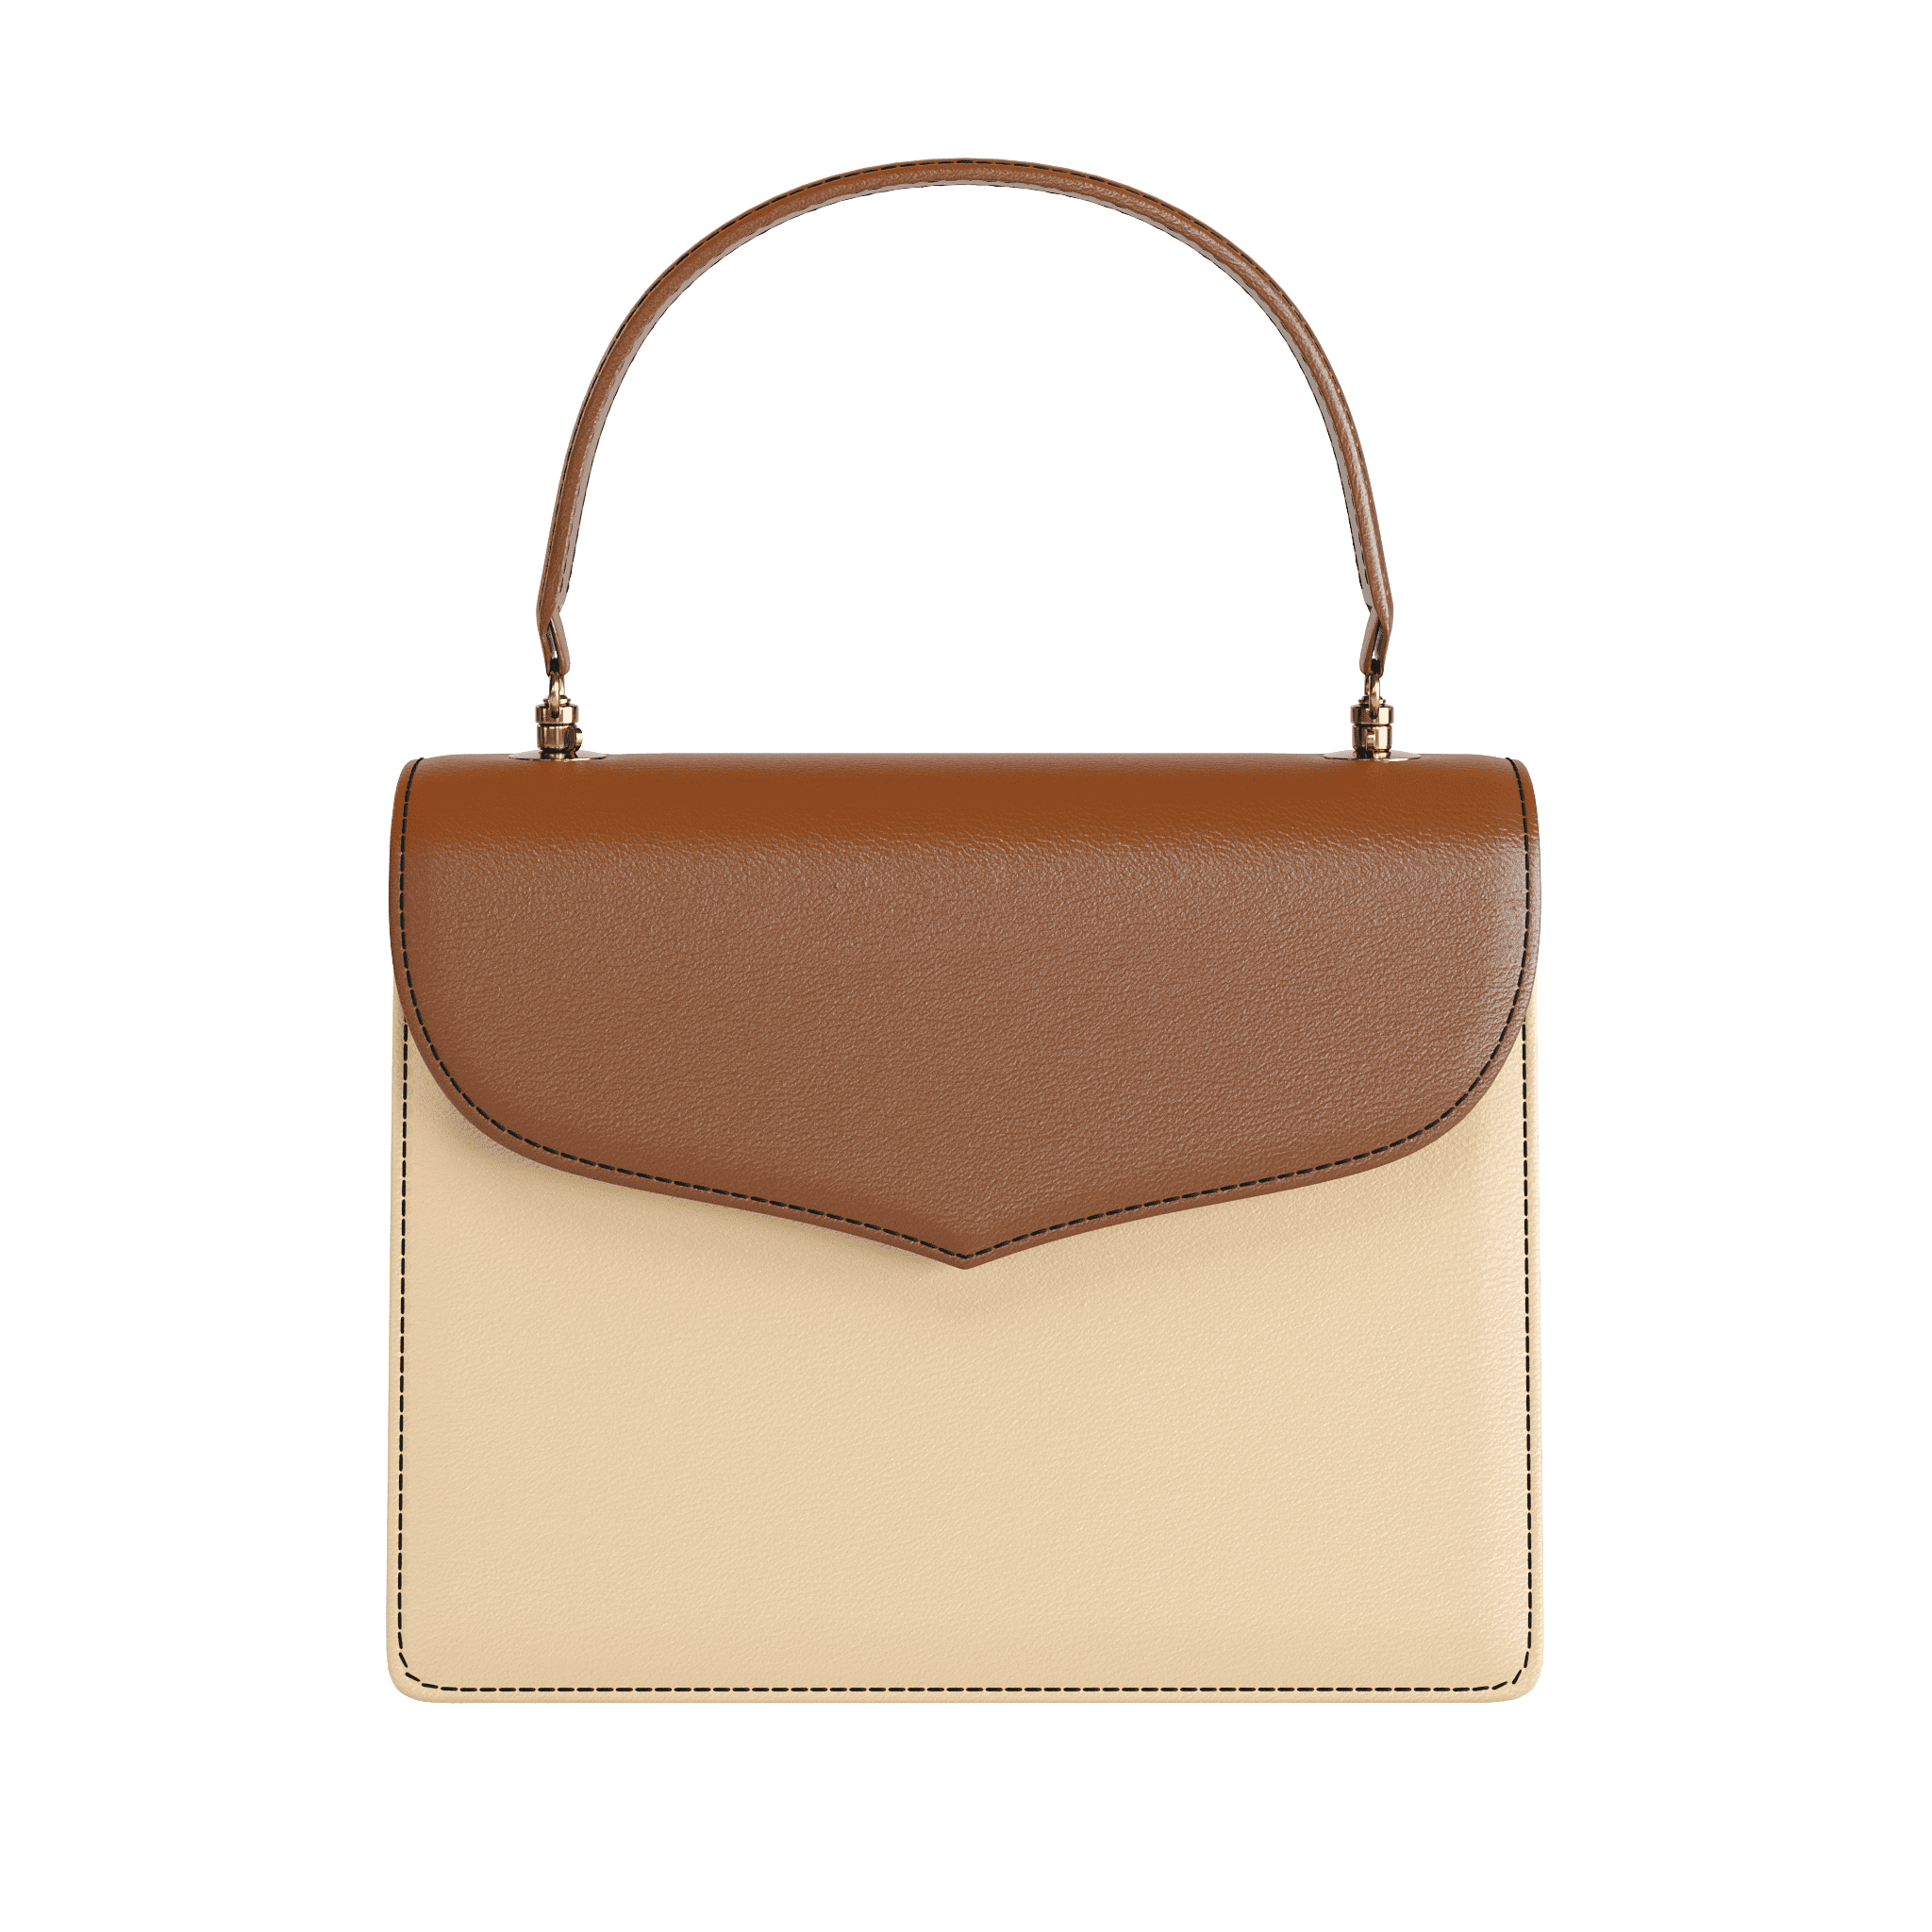 Two Tone Brown Handbag In Vegetable Tanned Leather